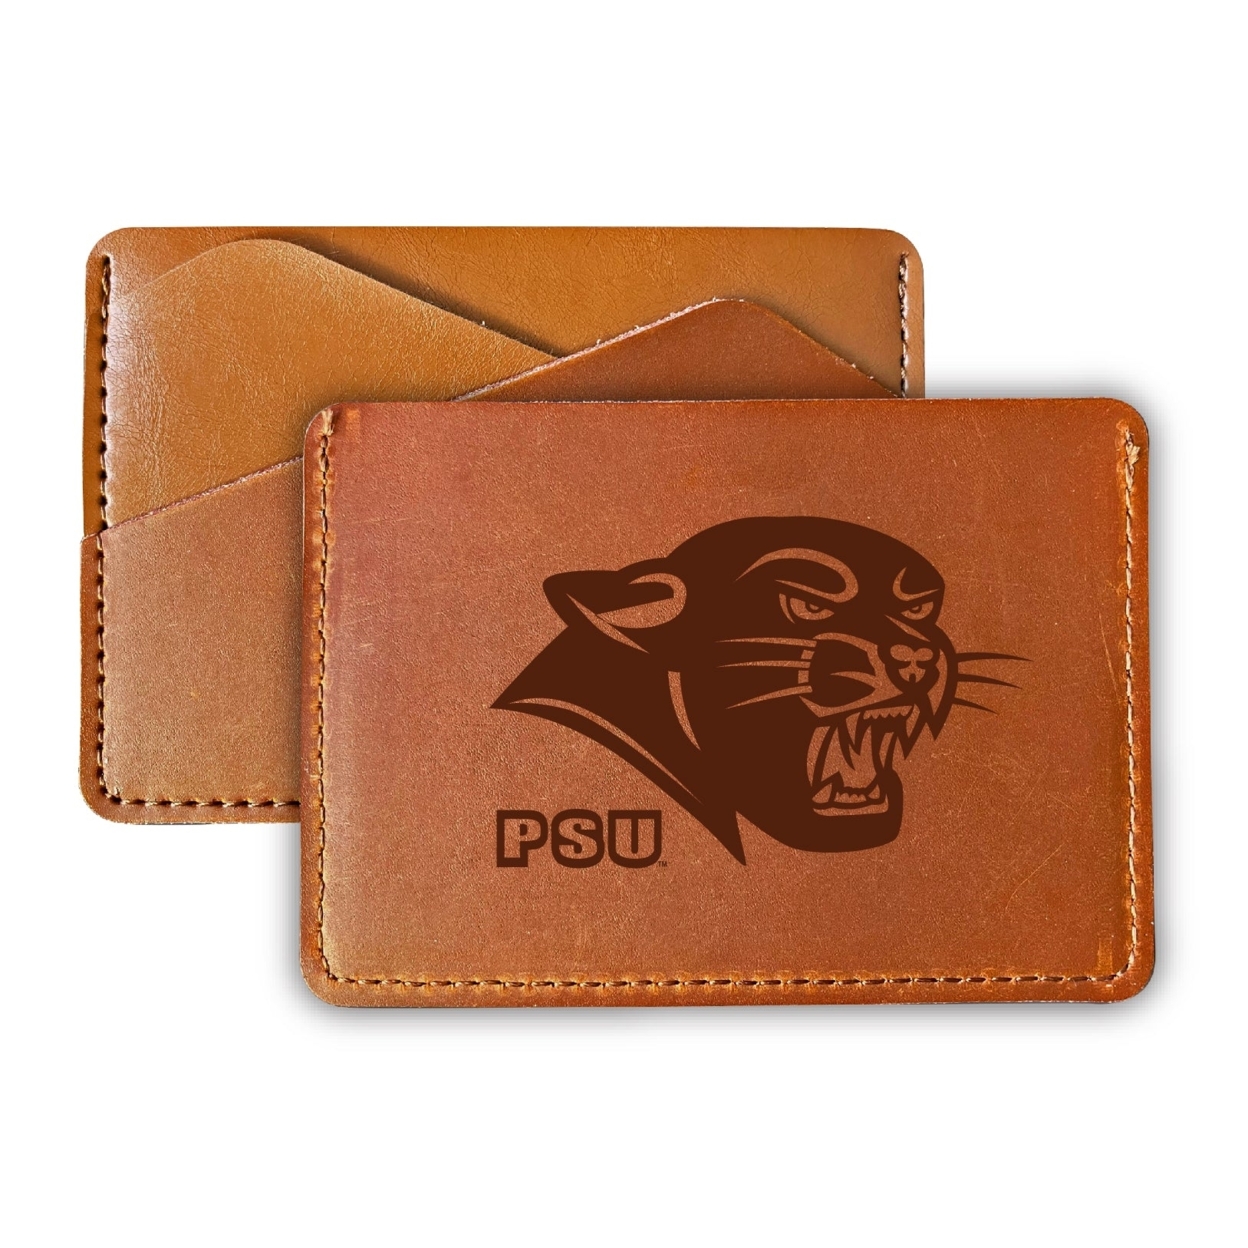 Plymouth State University College Leather Card Holder Wallet